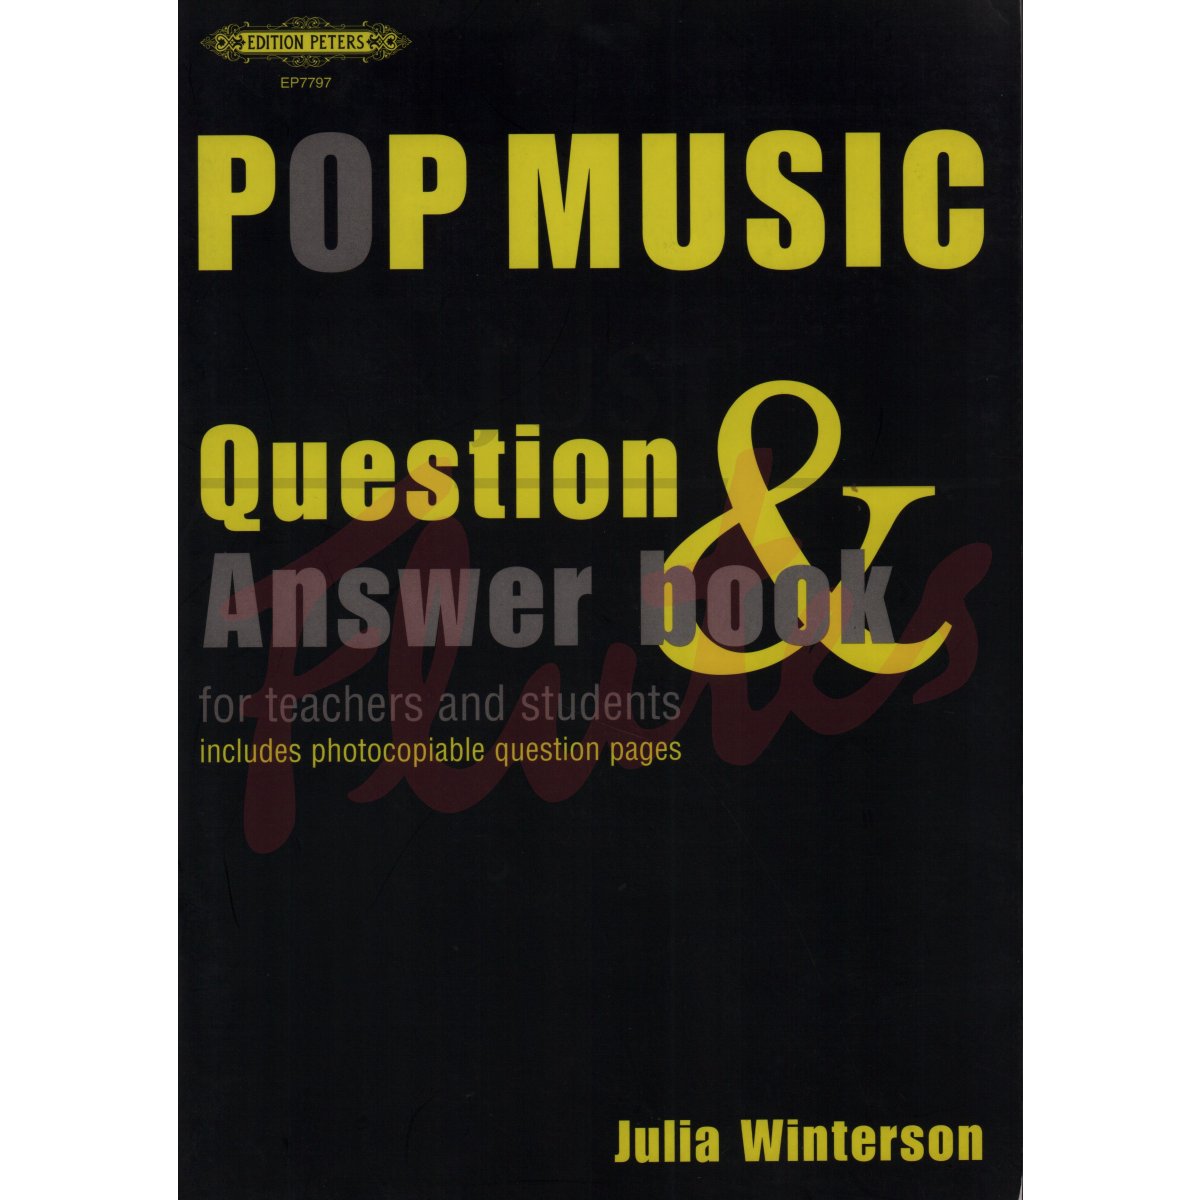 Pop Music - Question and Answer Book